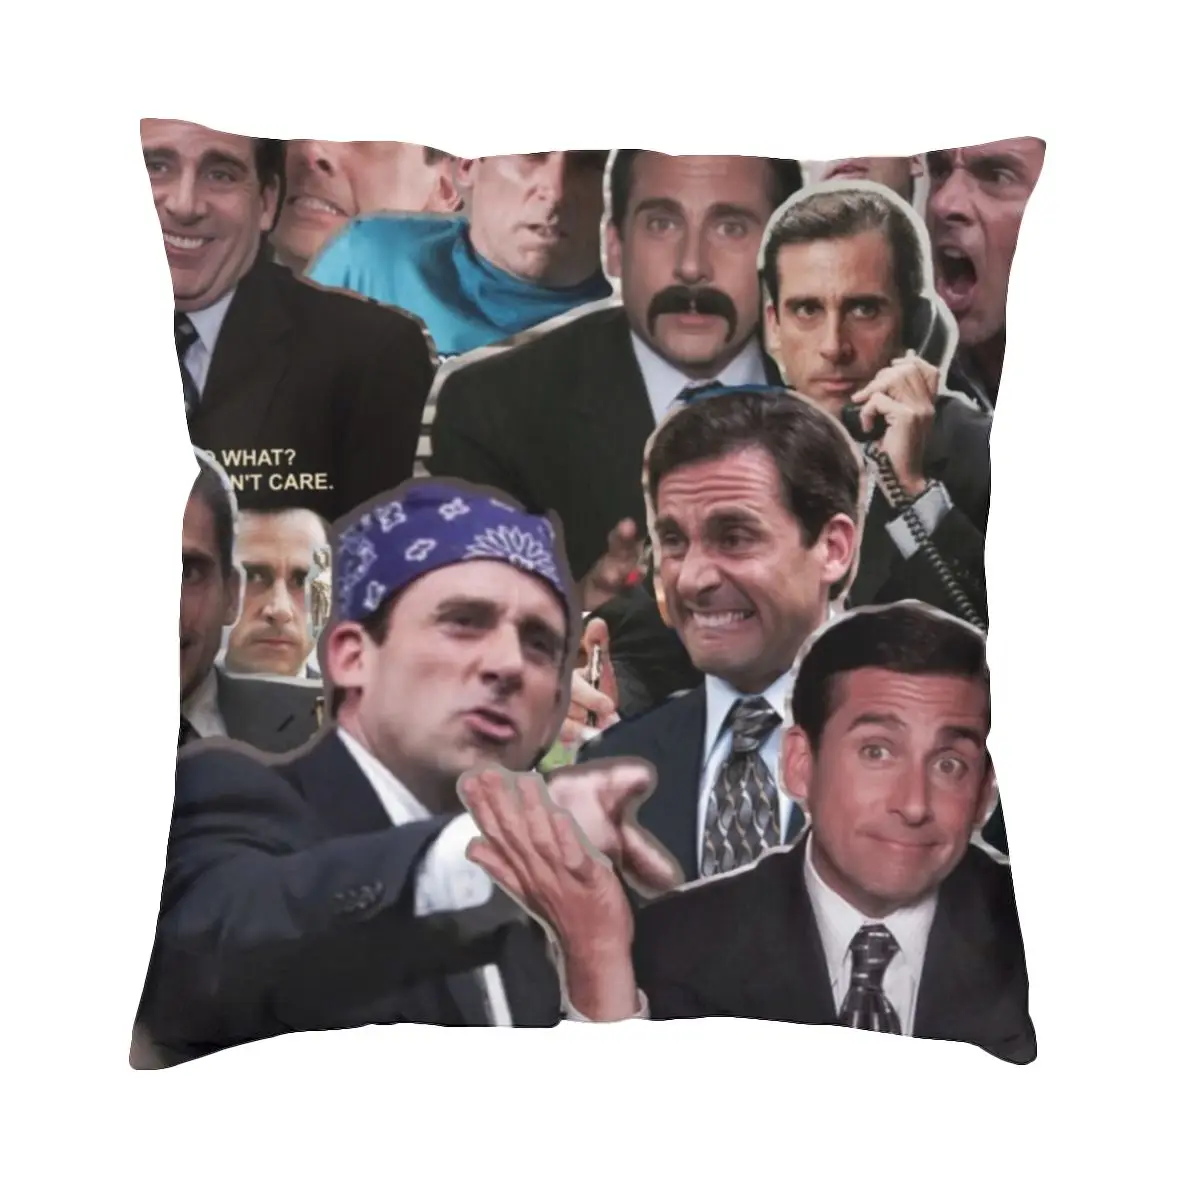 

The Office Michael Scott Steve Carell Pillowcase Printing Polyester Cushion Cover Decorative Tv Throw Pillow Case Cover Sofa